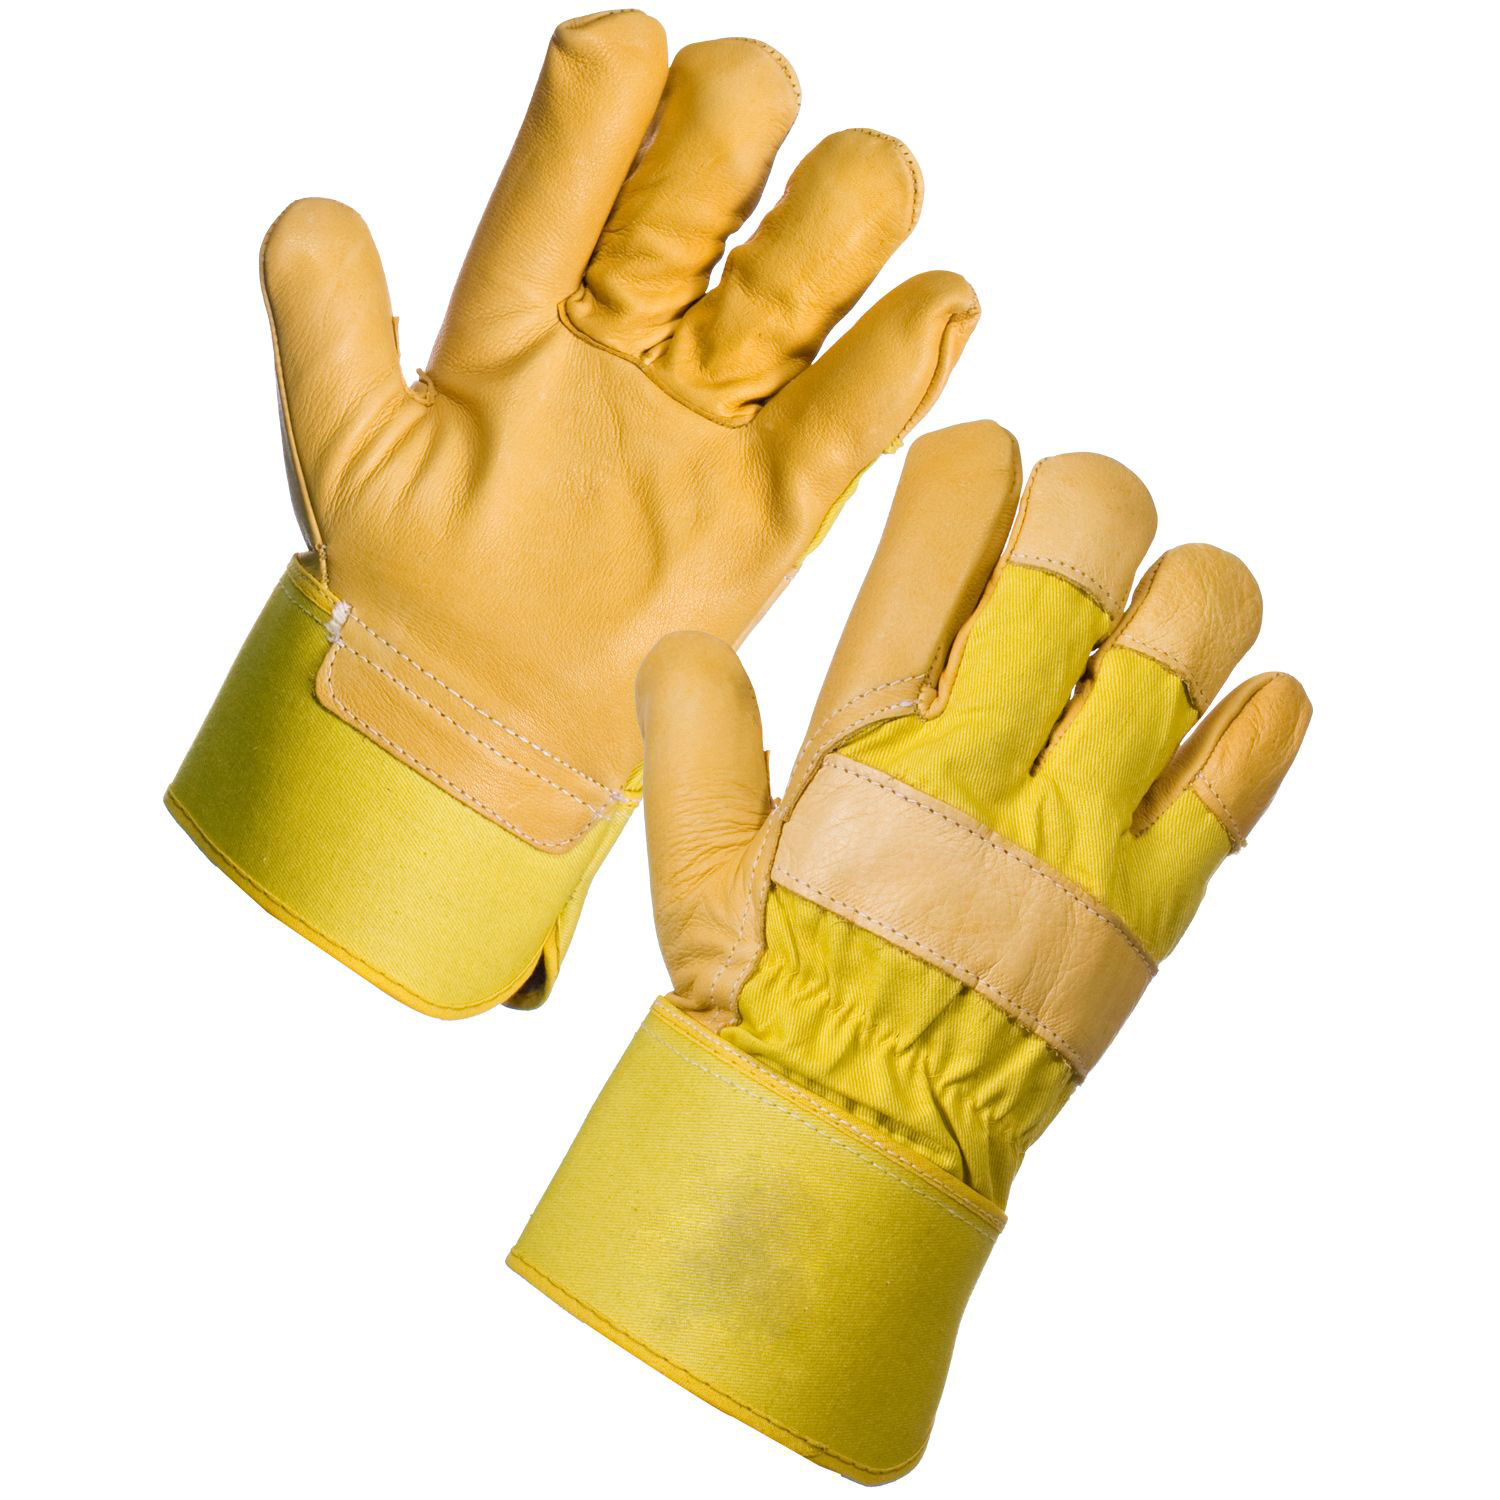 Heavyweight Durable Drivers Hide Rigger Gloves